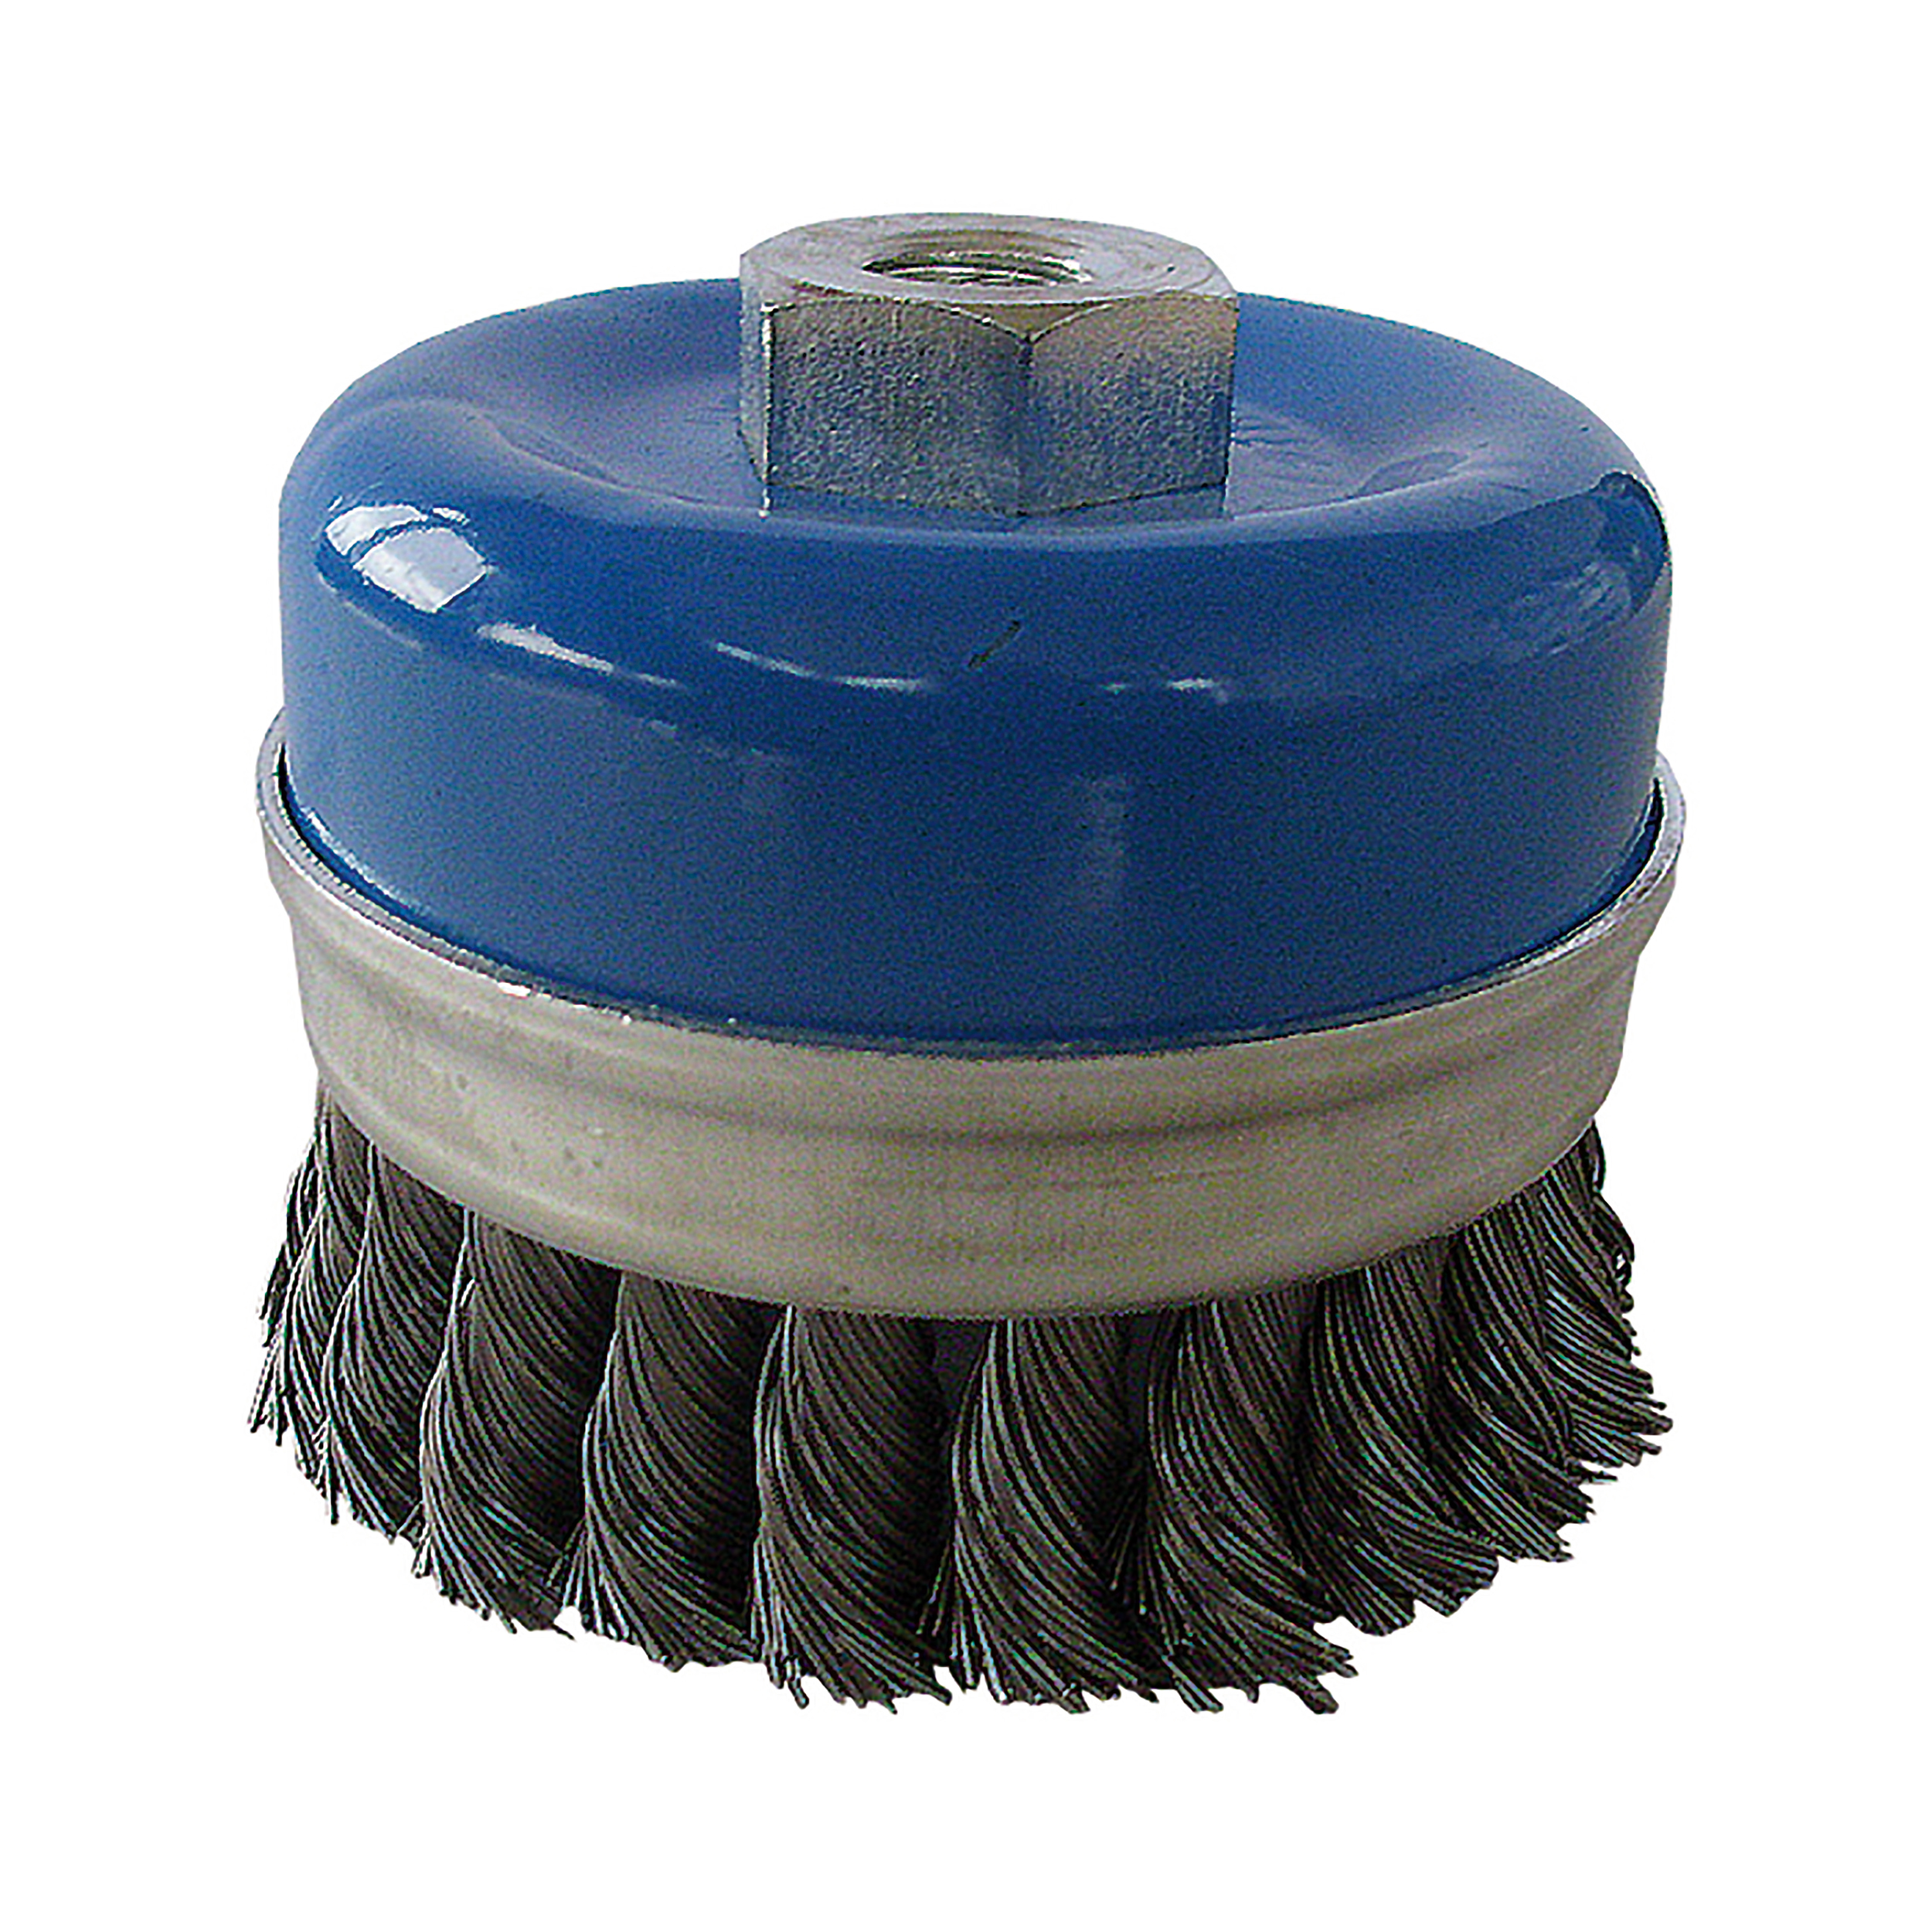 pot brushes, single row, conductor Ø 0,50mm, with thread M 14, Ø 80mm, until max. 8.500 r.p.m., steel wire